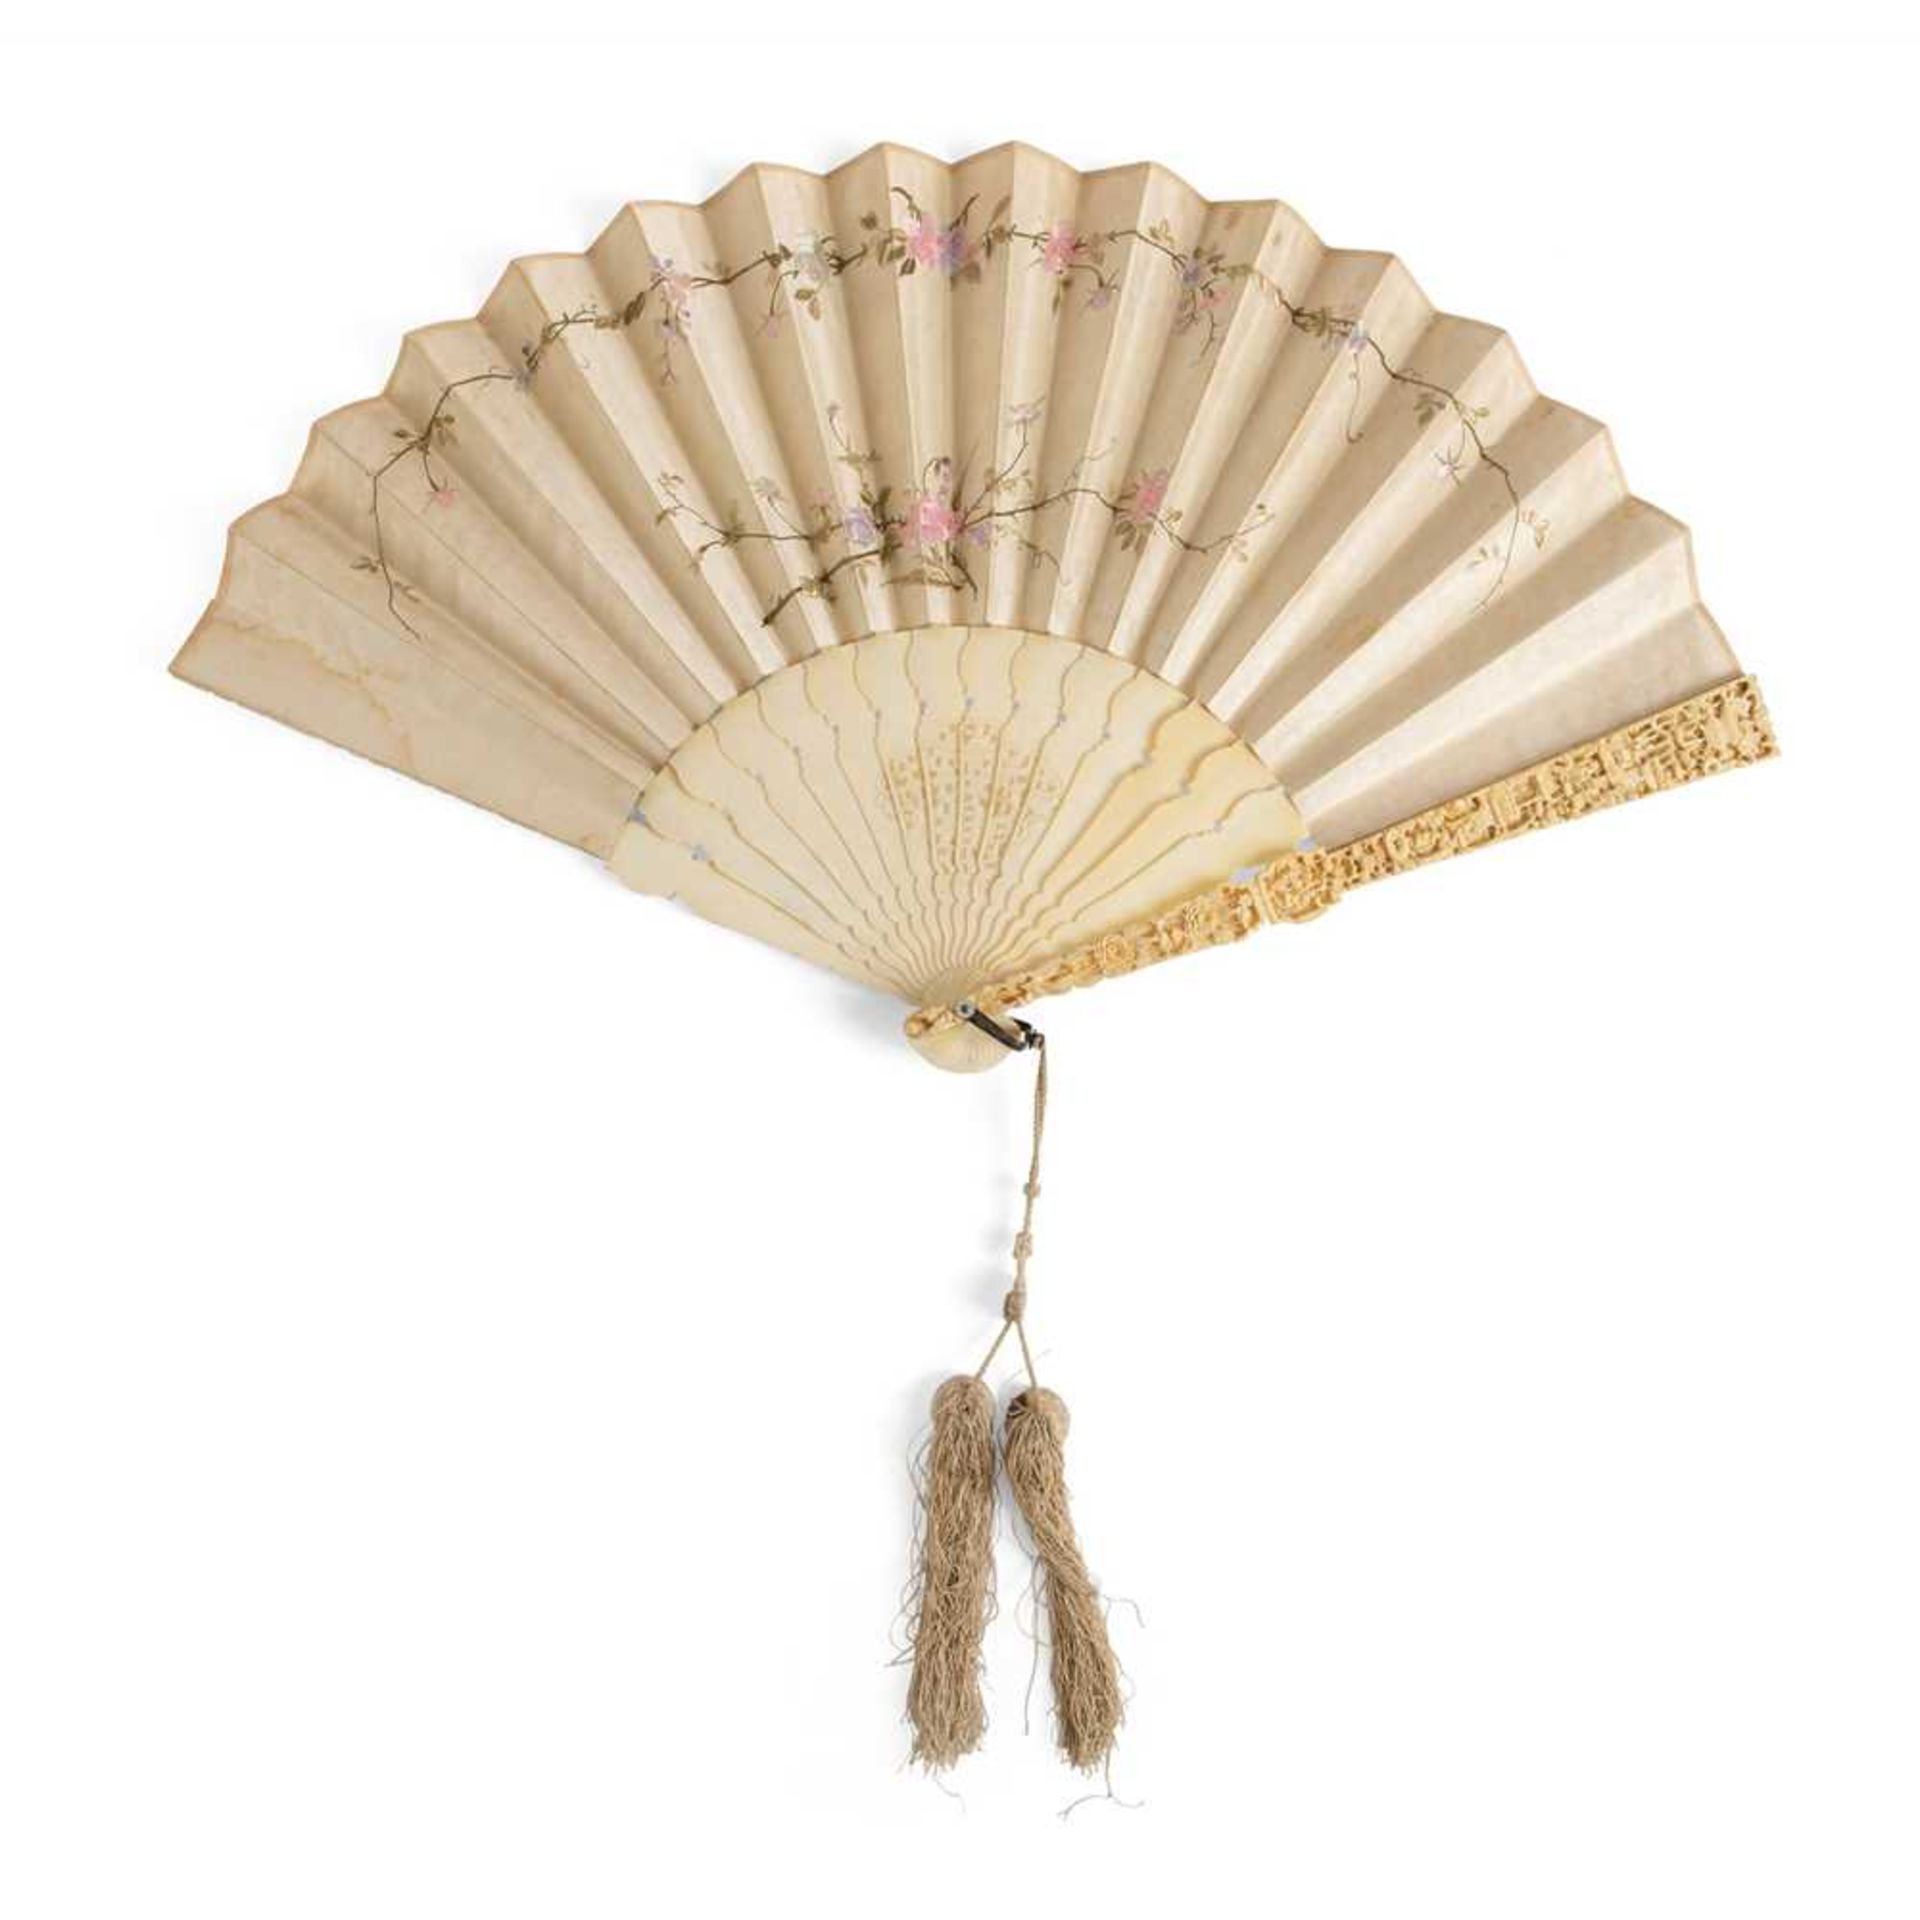 LARGE CANTON IVORY CARVING AND EMBROIDERY ON SILK FAN WITH BOX QING DYNASTY, 19TH CENTURY - Bild 2 aus 3